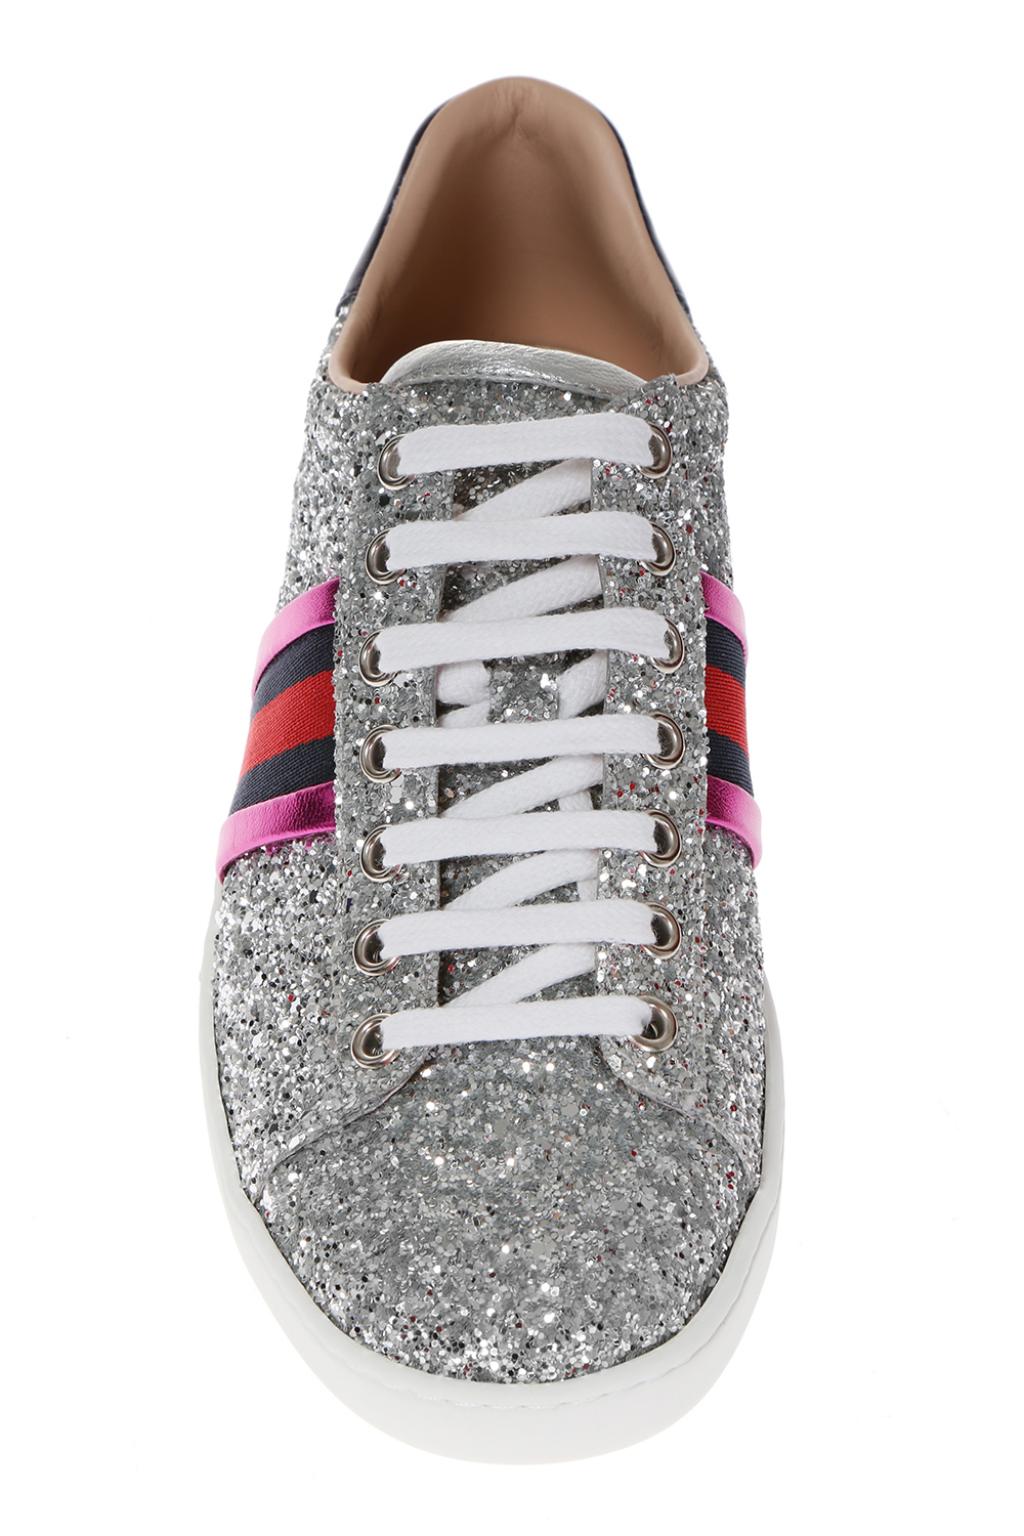 gucci ace glitter sneakers pink